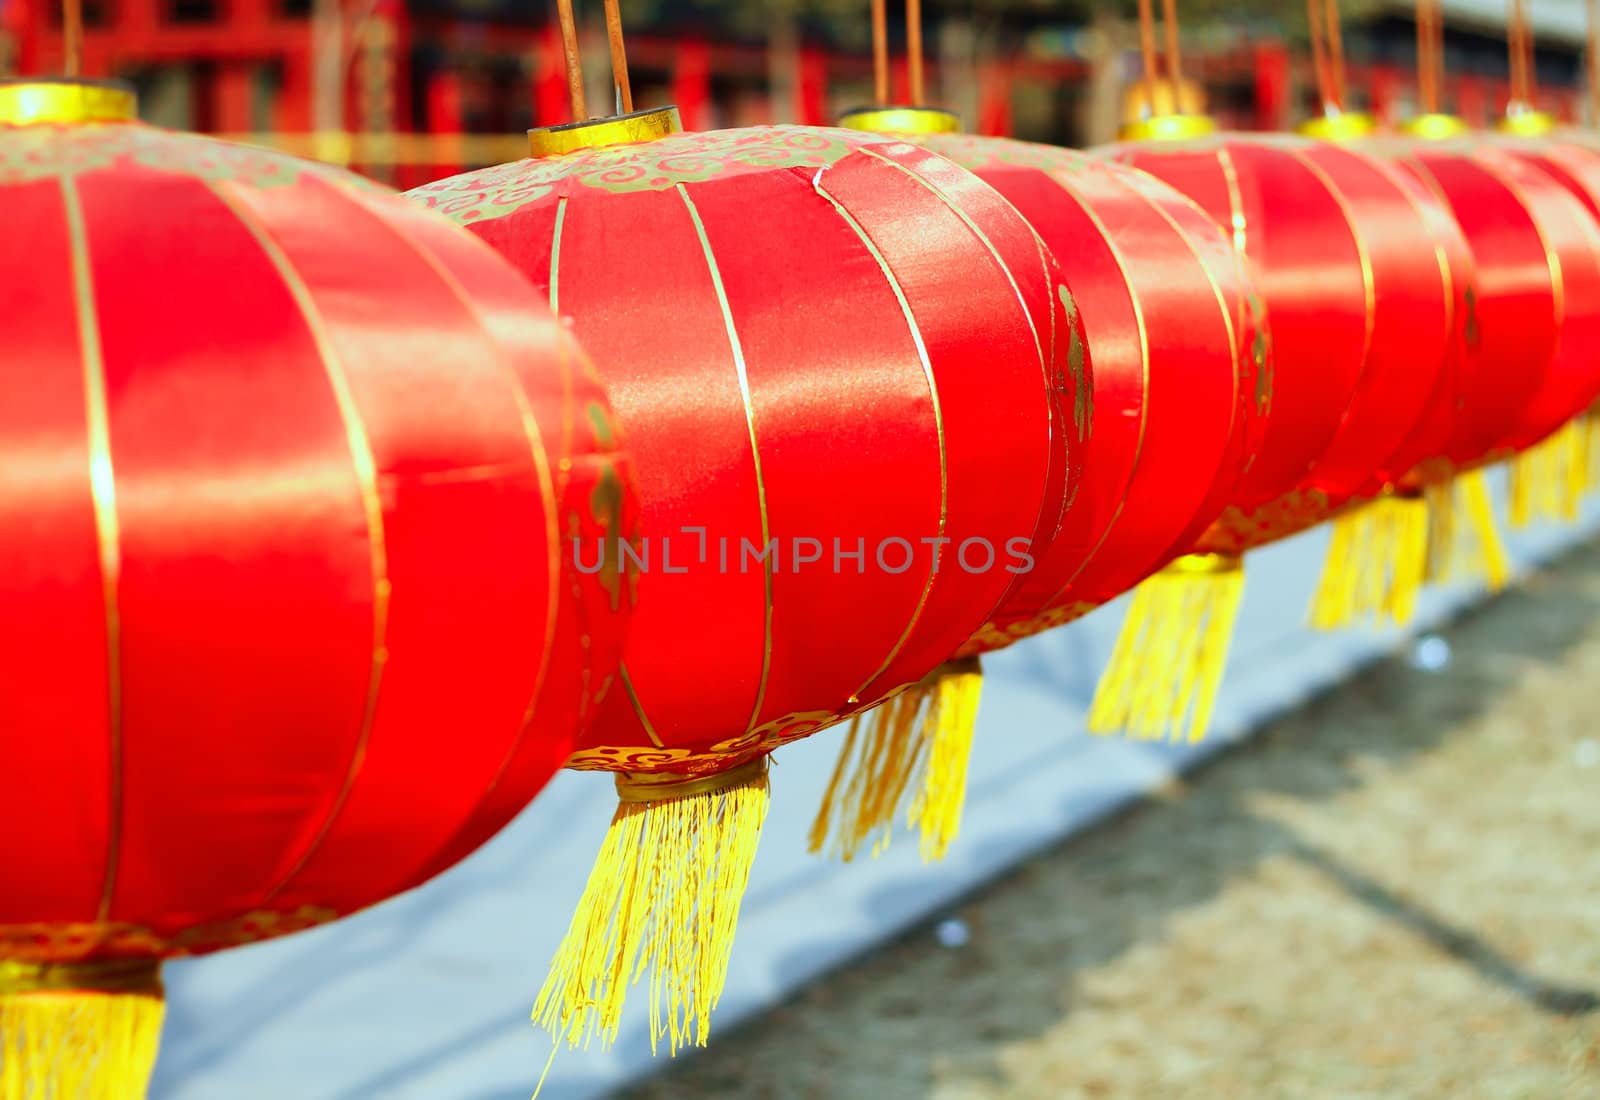 Typical Chinese style lantern with traditional Chinese red color, which brings people with happiness and luck